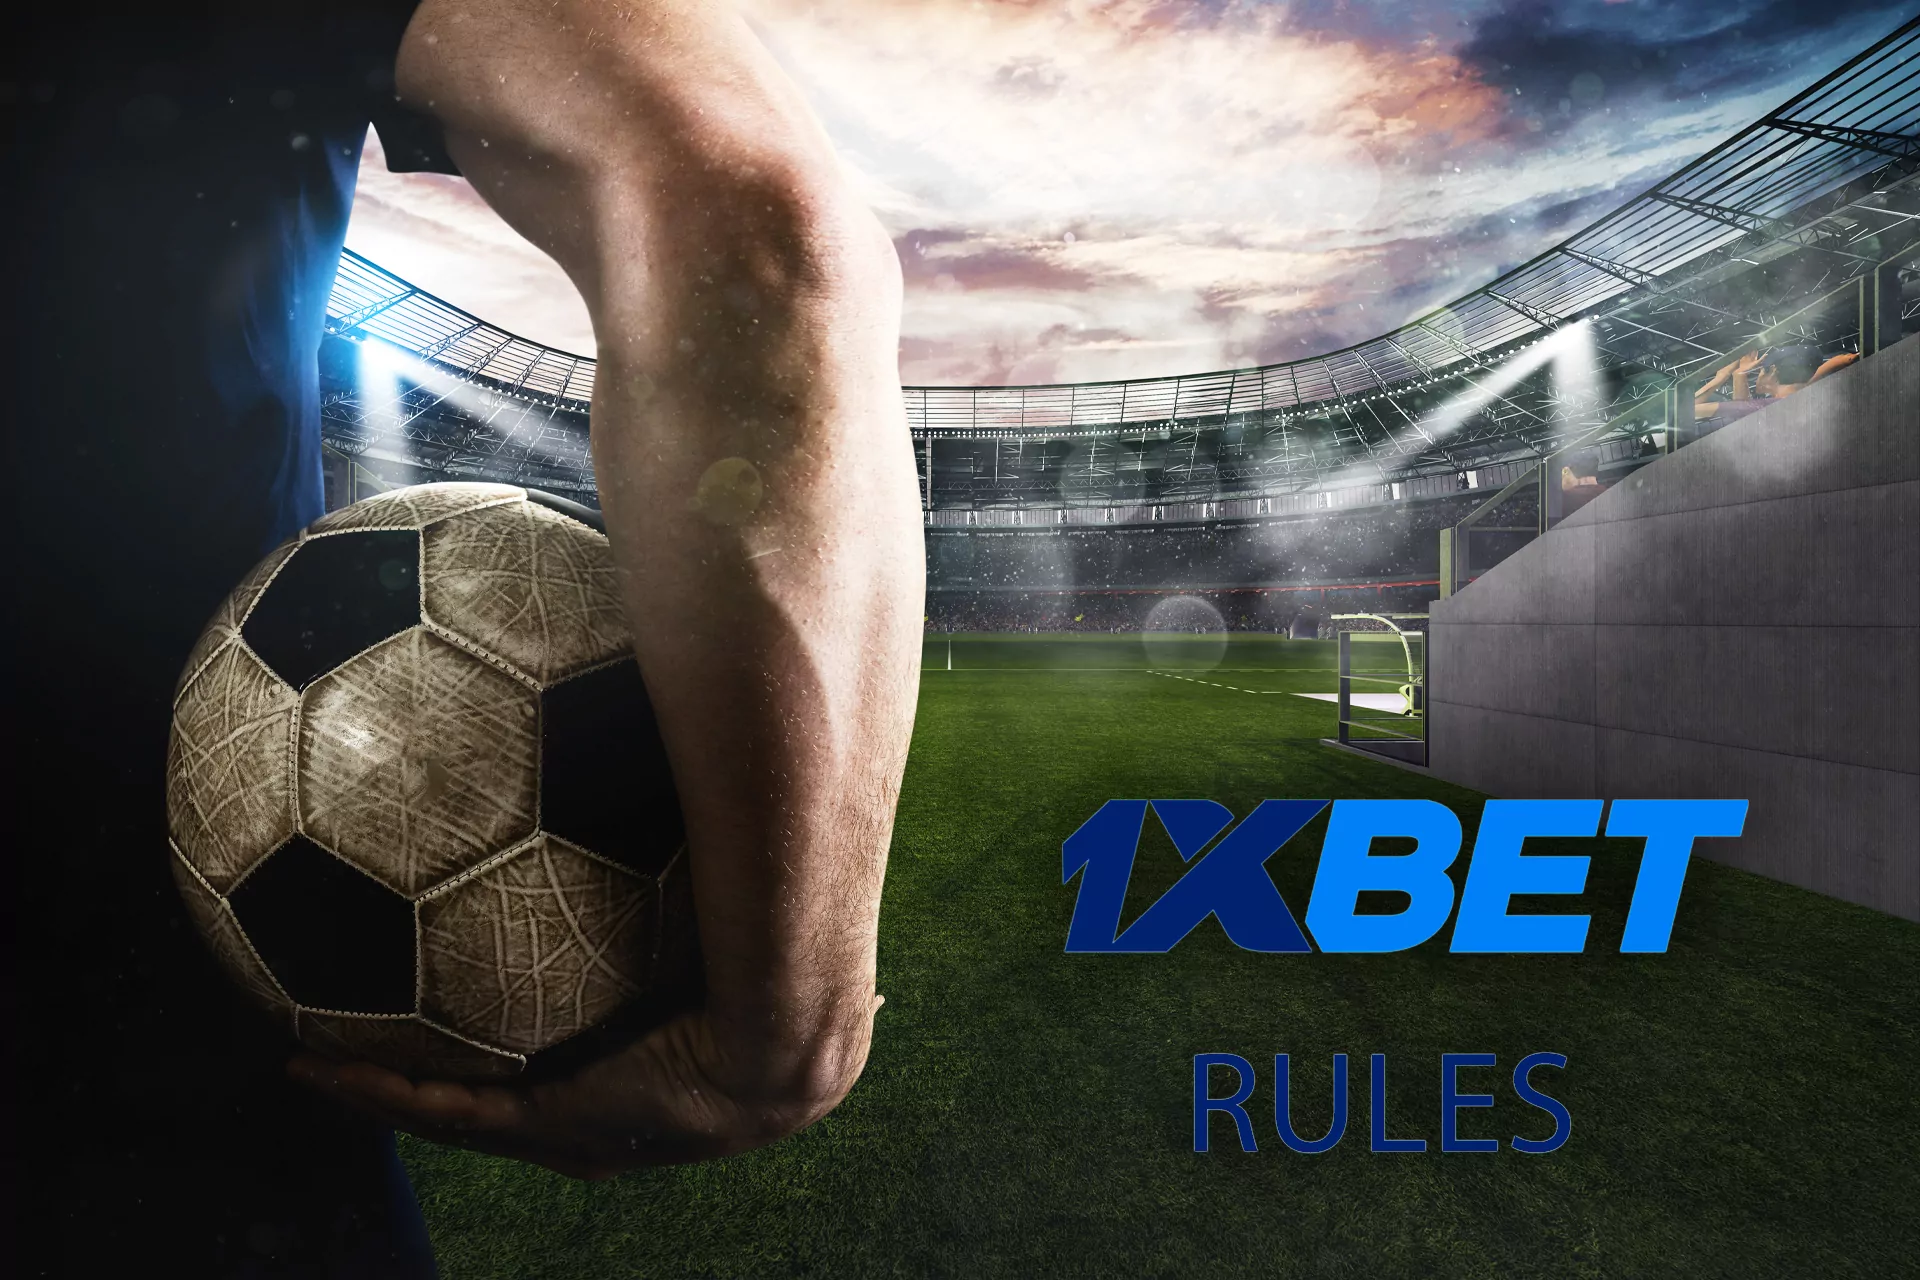 Read the rules of 1xBet in India.